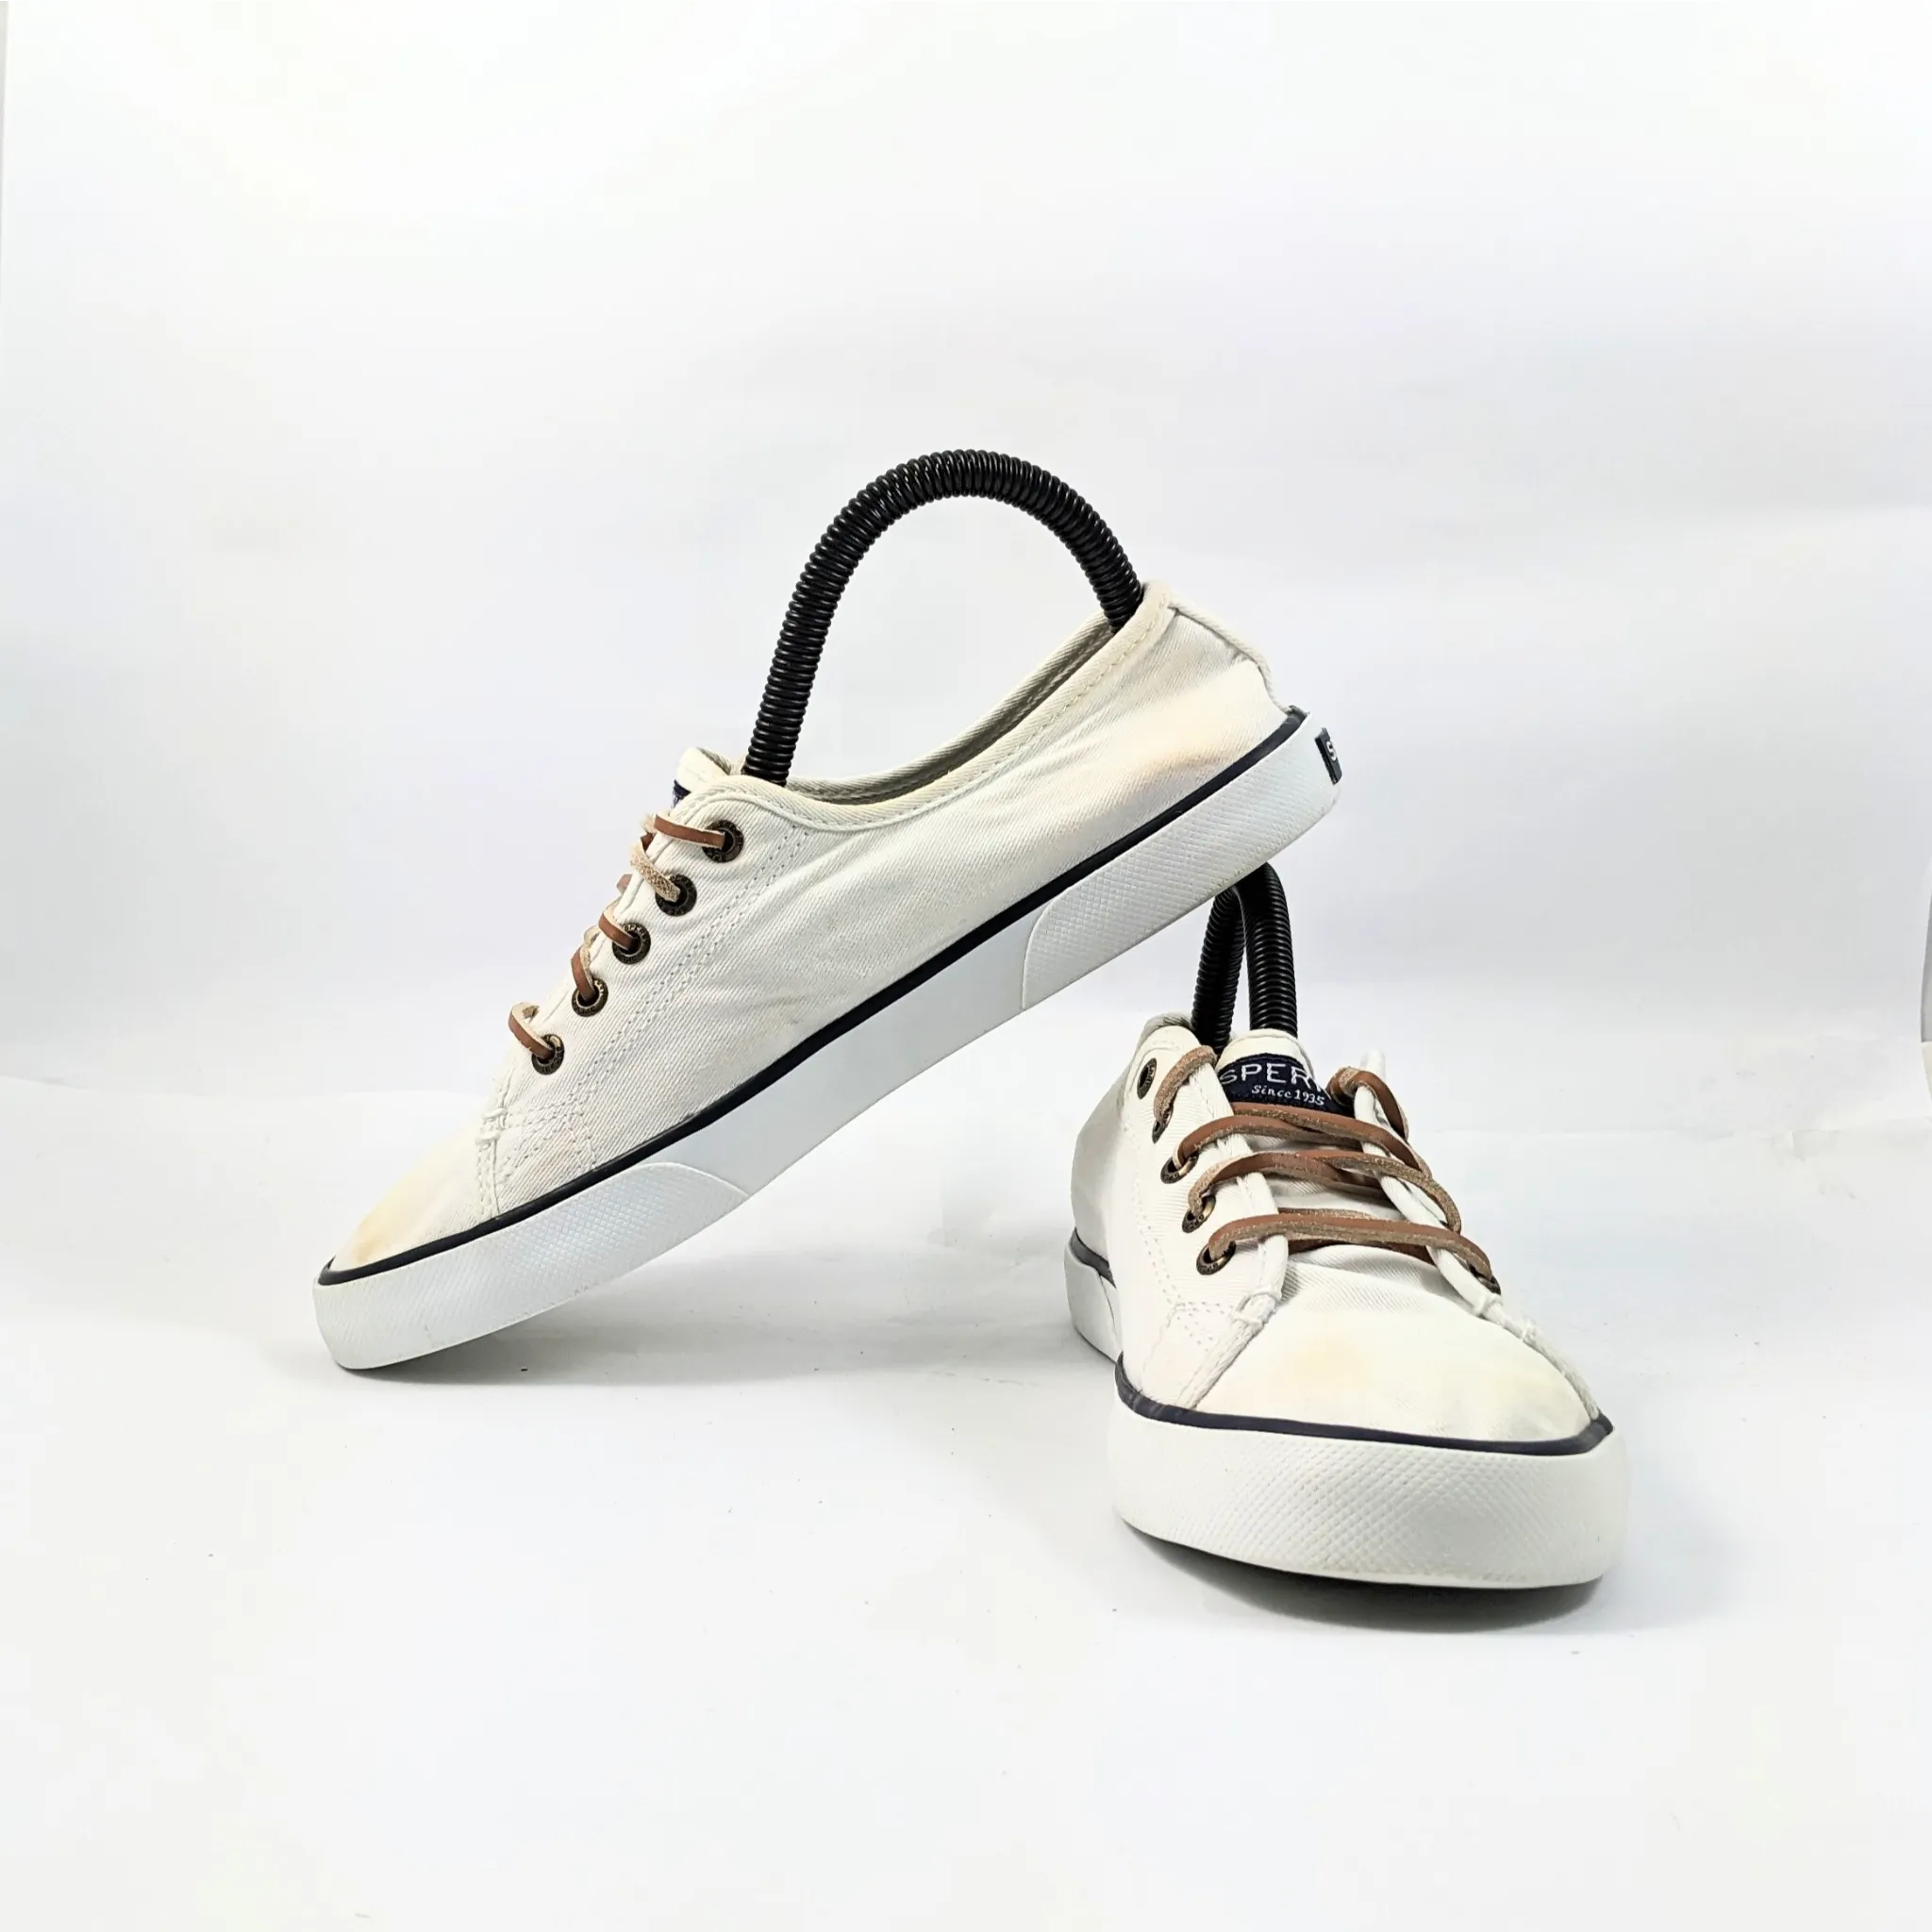 Sperry White Sneakers